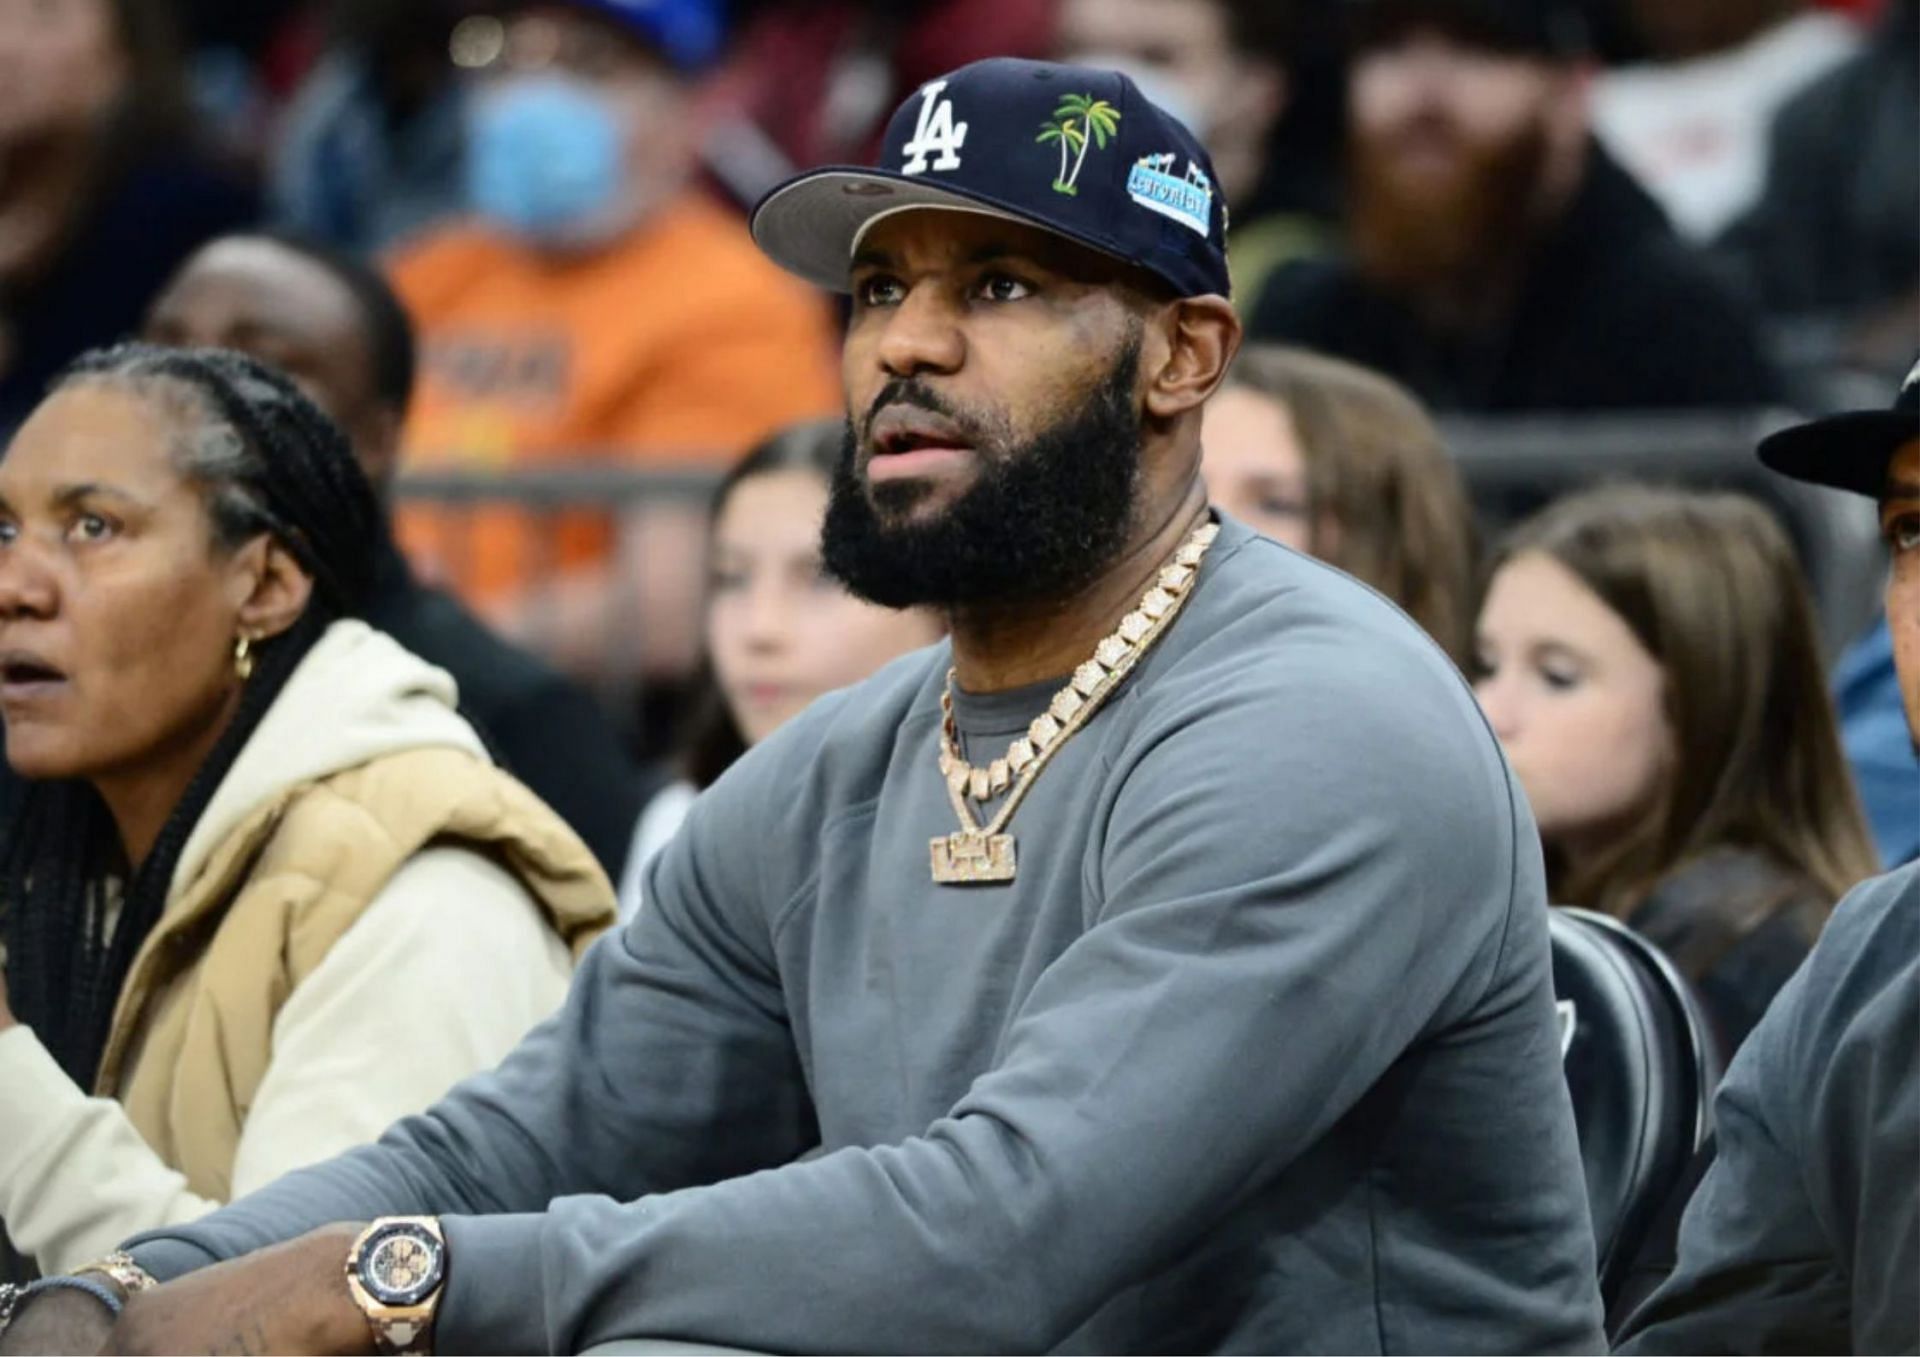 LeBron James was trolled by a fan as he entered the gym to watch his son, Bronny James play. [photo: Essentially Sports]